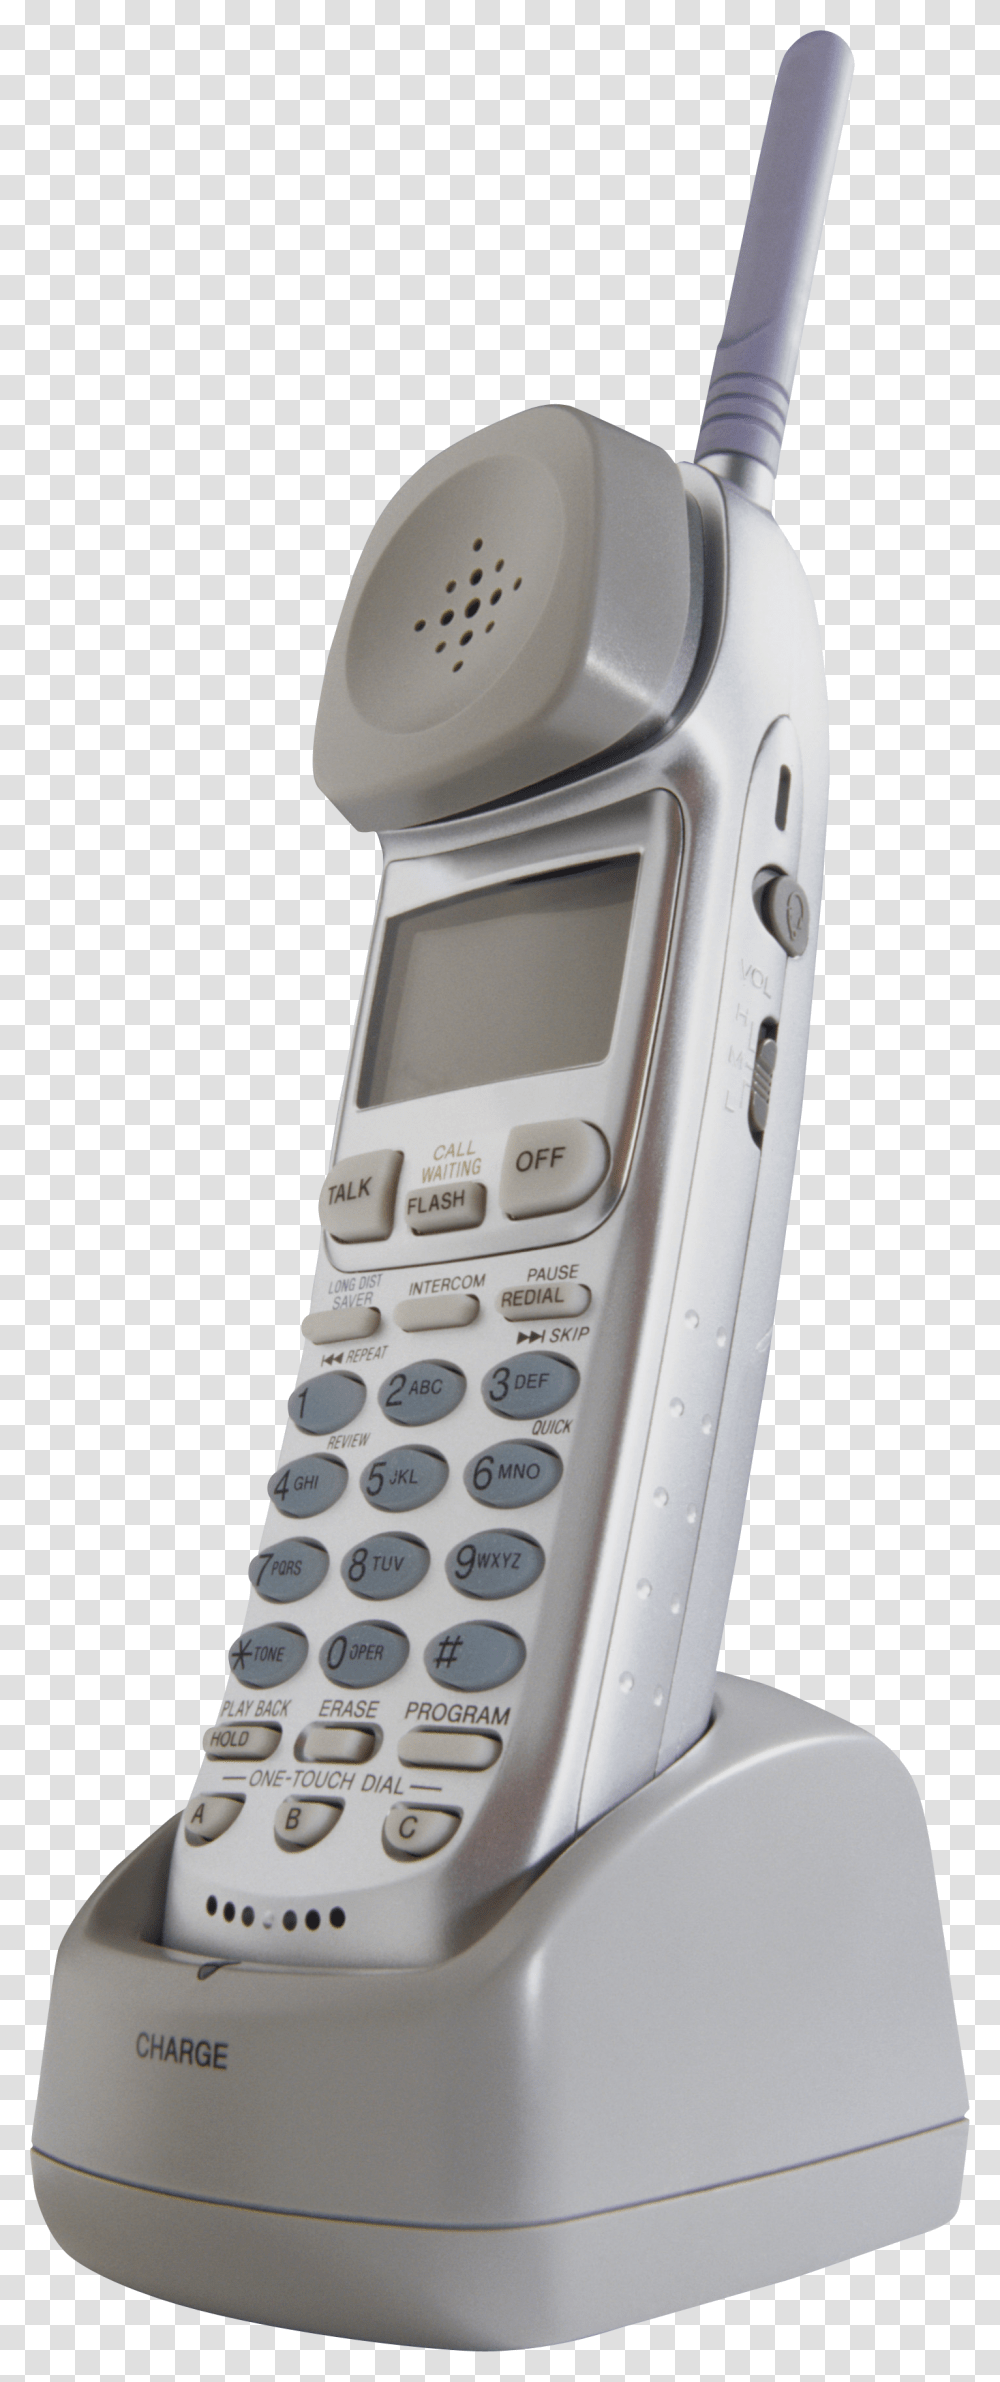 Phone, Electronics, Calculator, Mobile Phone, Cell Phone Transparent Png